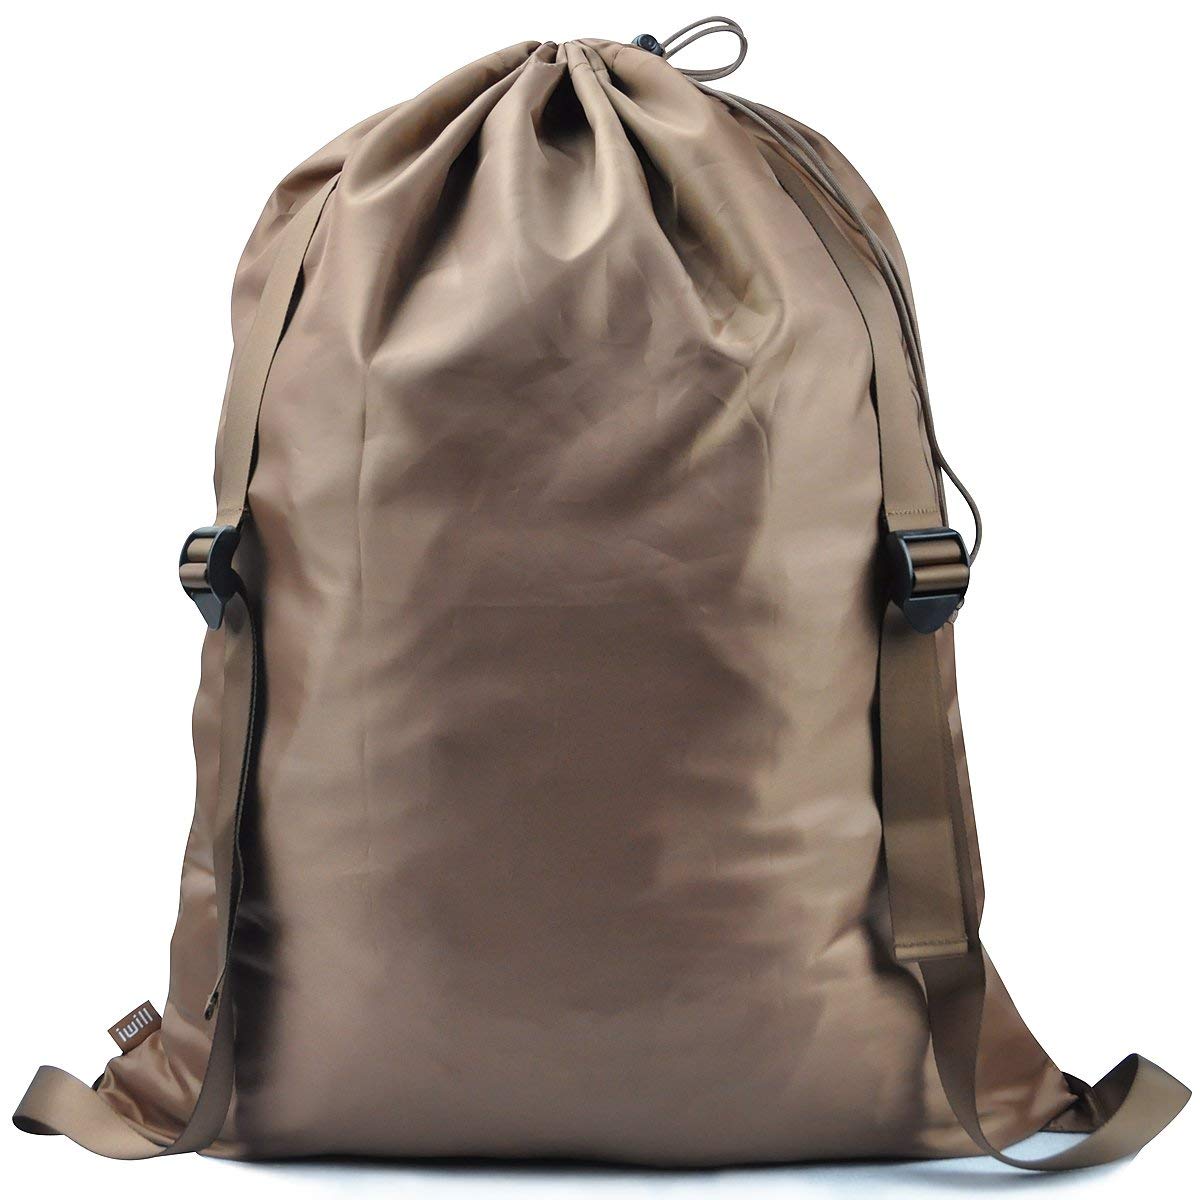 Dirty Laundry Backpack with Adjustable Shoulder Laundry Bag